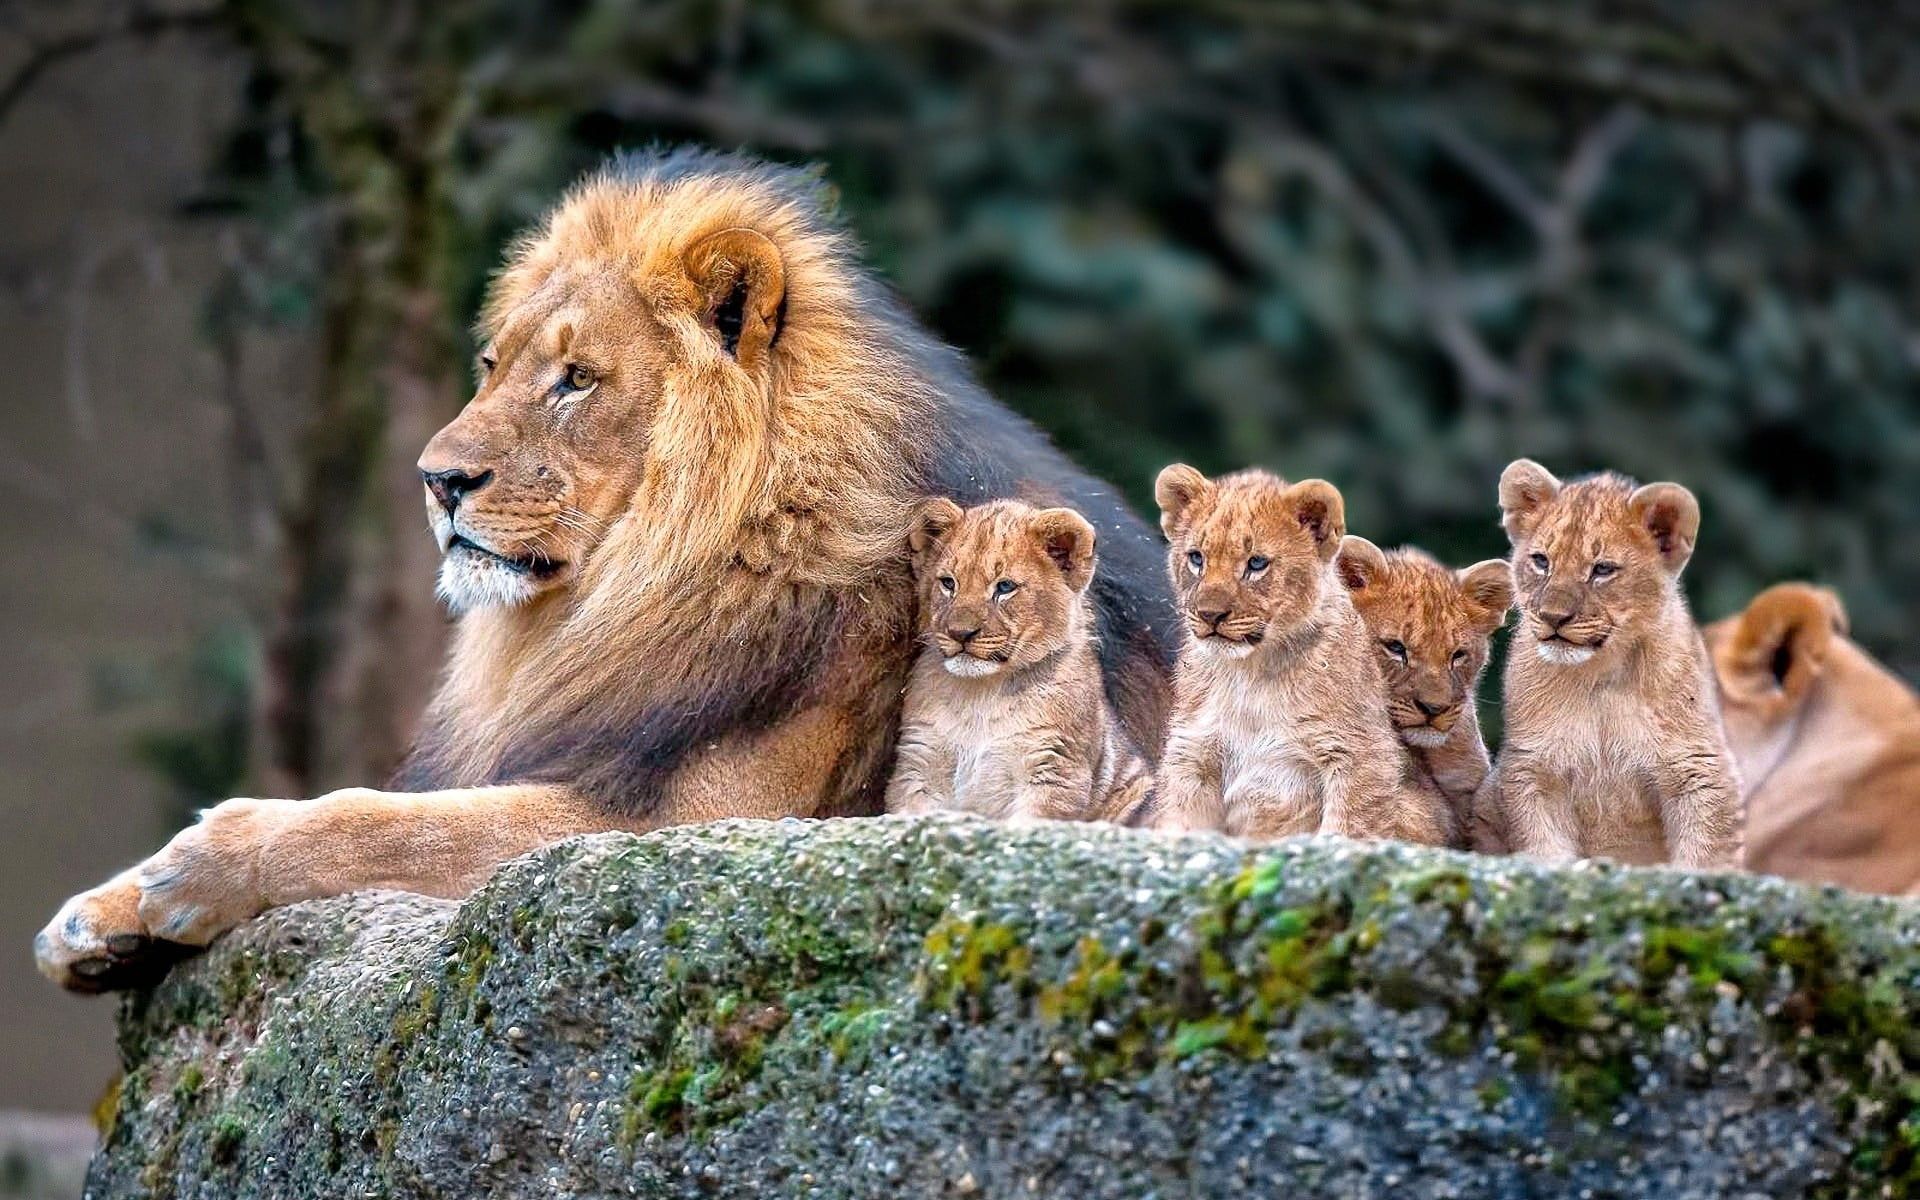 Lion and baby lions, lion, nature, animals, baby animals HD wallpaper